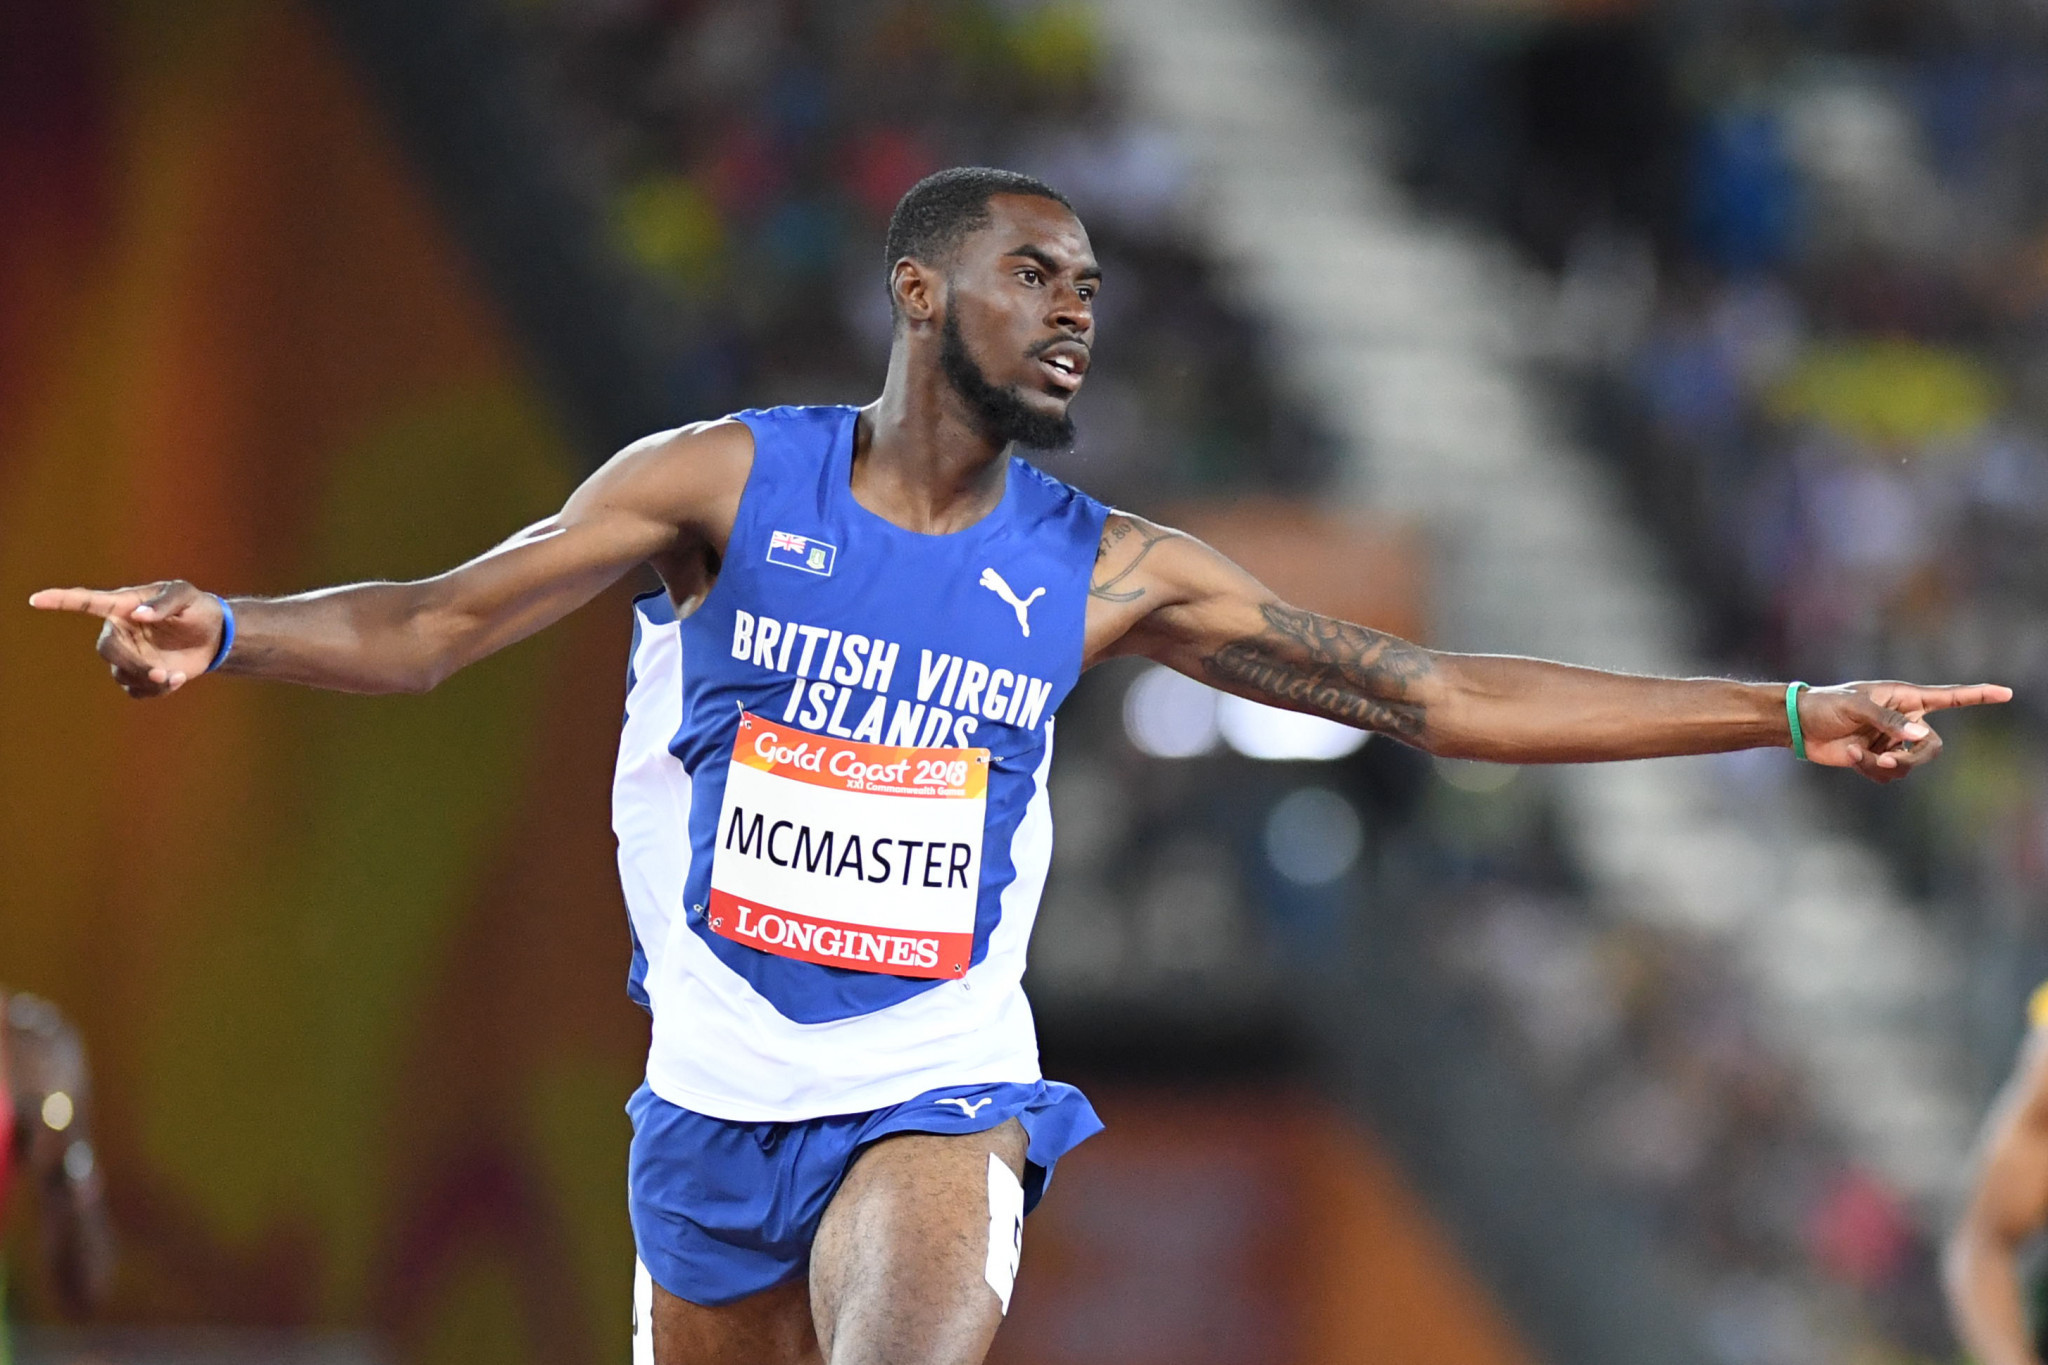 Kyron McMaster wins the Commonwealth 400m hurdles title for the British Virgin Islands last year - his country now hopes he will next earn a medal at the Pan American Games in Lima ©Getty Images